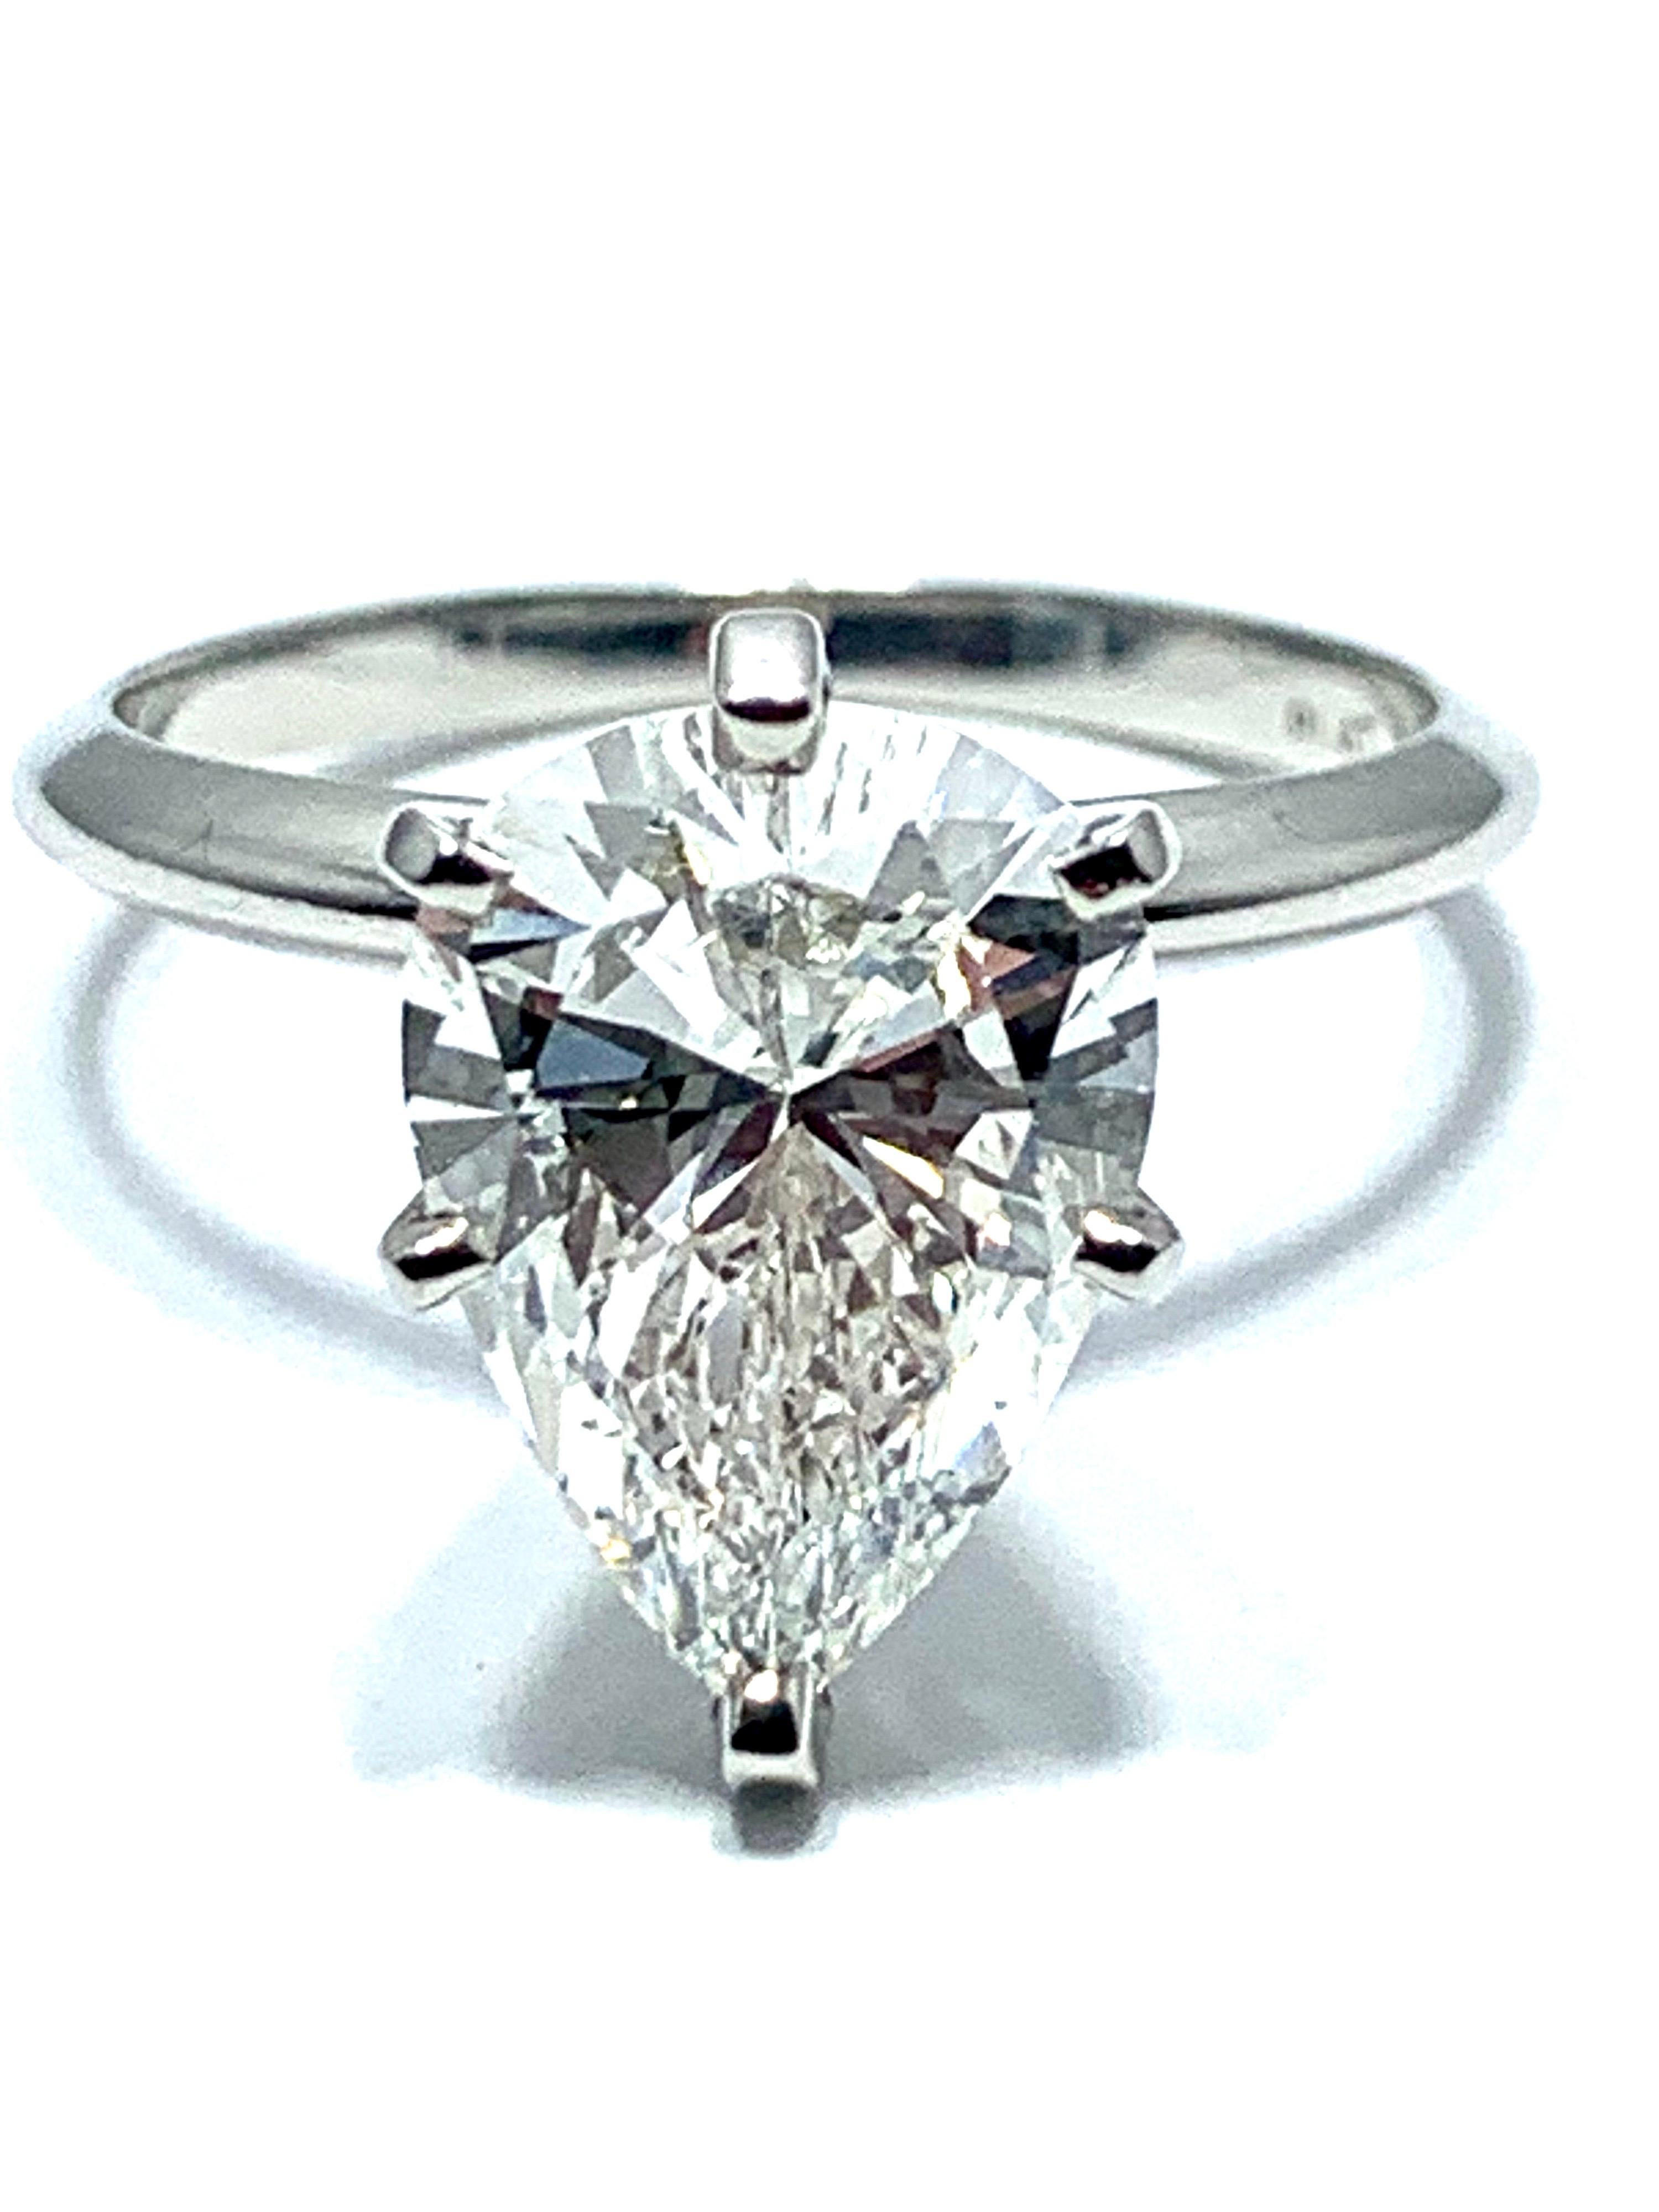 An absolutely stunning 2.85 carat pear shape Diamond and platinum ring. The pear shape is set in a six prong head with a 2.5mm shank.  The Diamond is graded by GIA as H color, VS2 clarity, and it is gorgeous!  The GIA report number is 1206439363. 